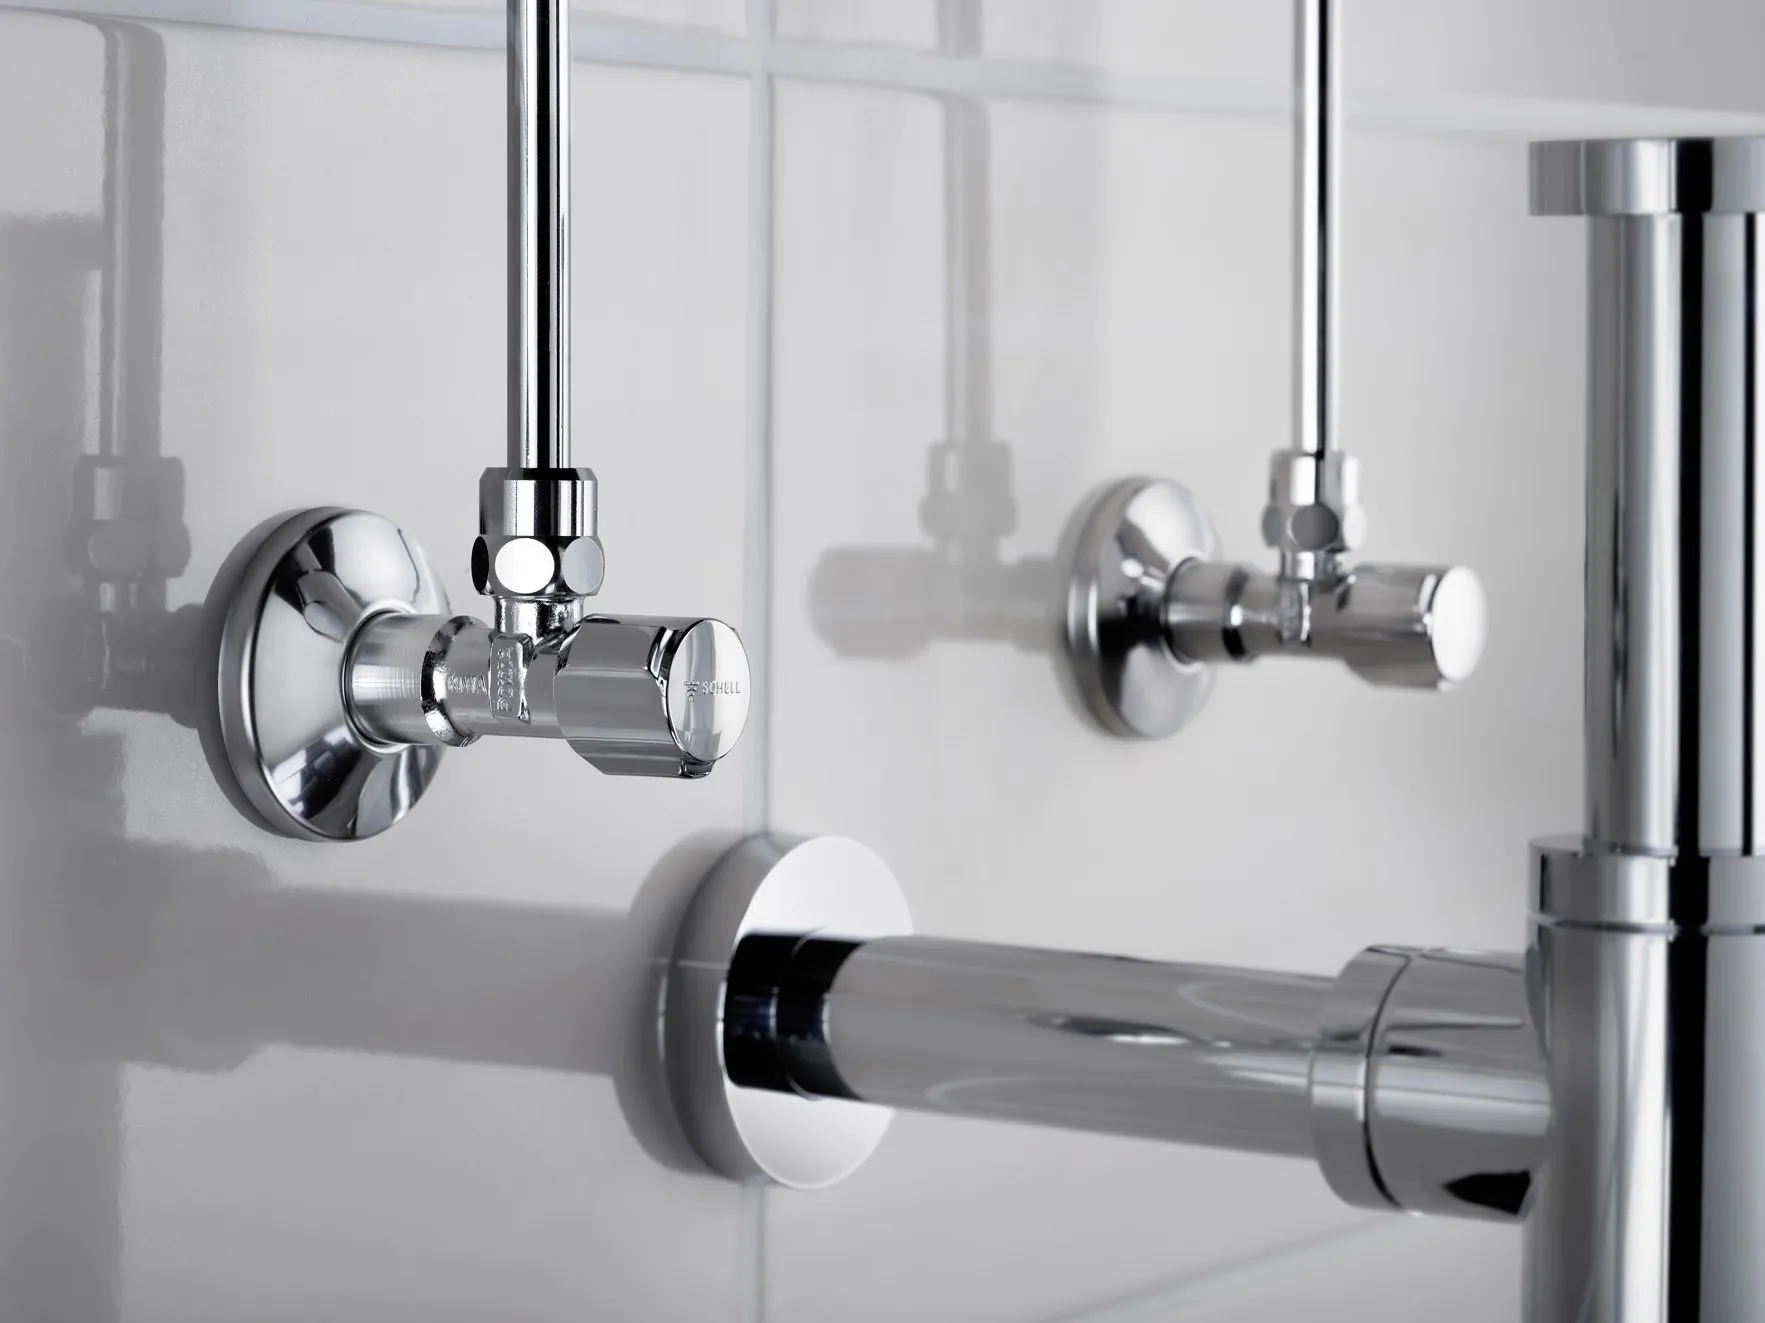 SCHELL Angle valves comfort AV plumbing product for residential and commercial projects